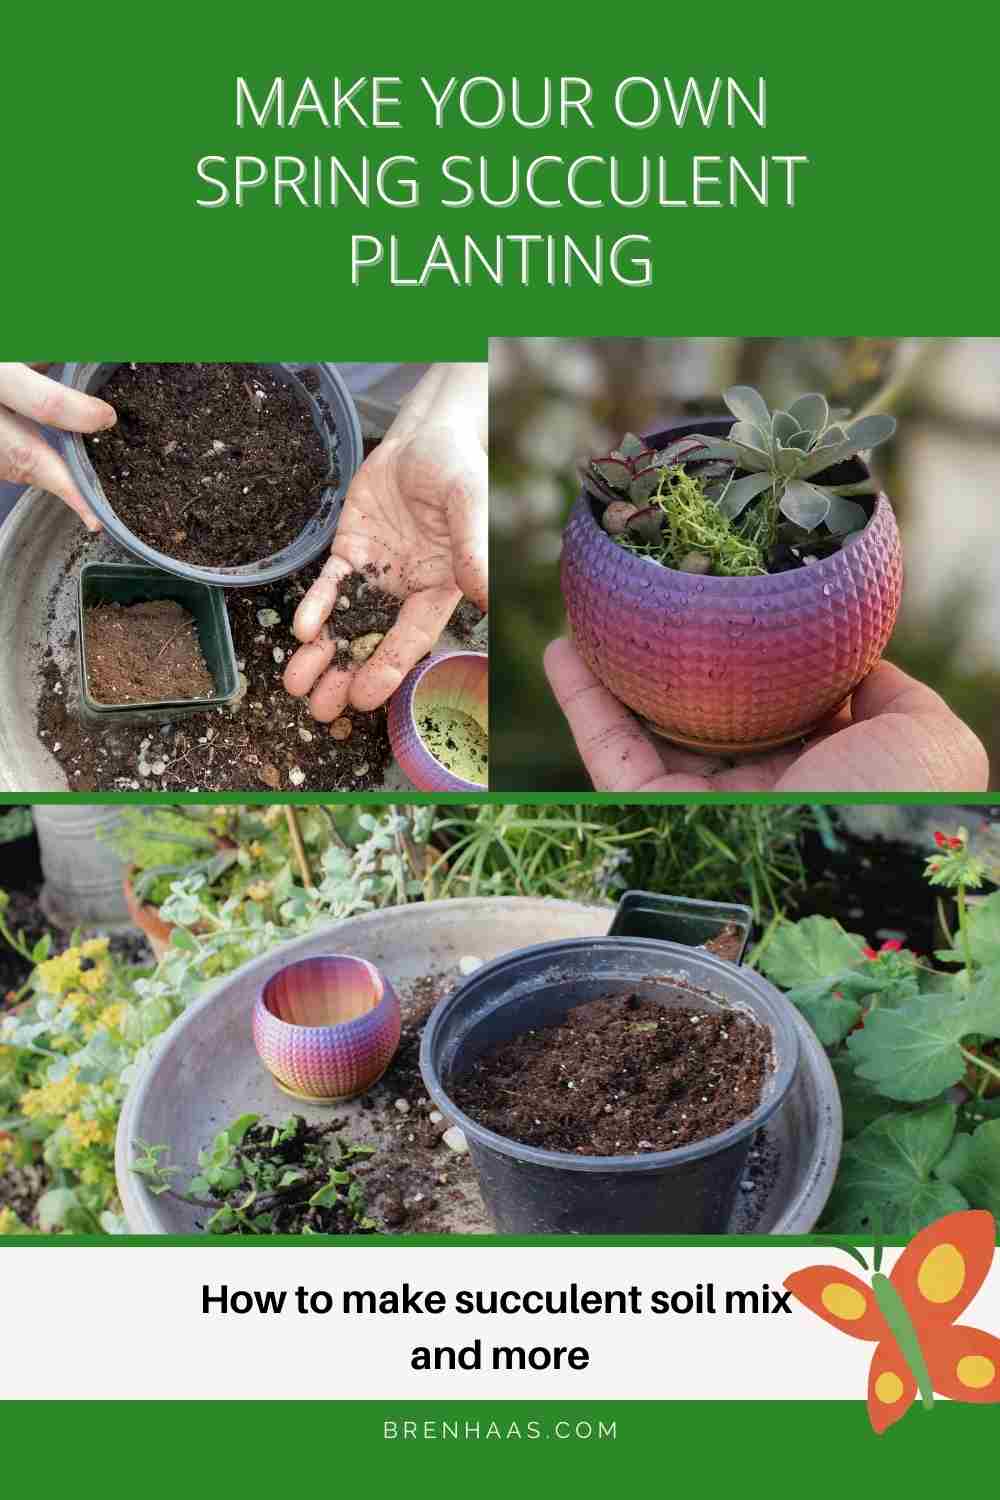 Make Your Own Succulent Container | Pinterest